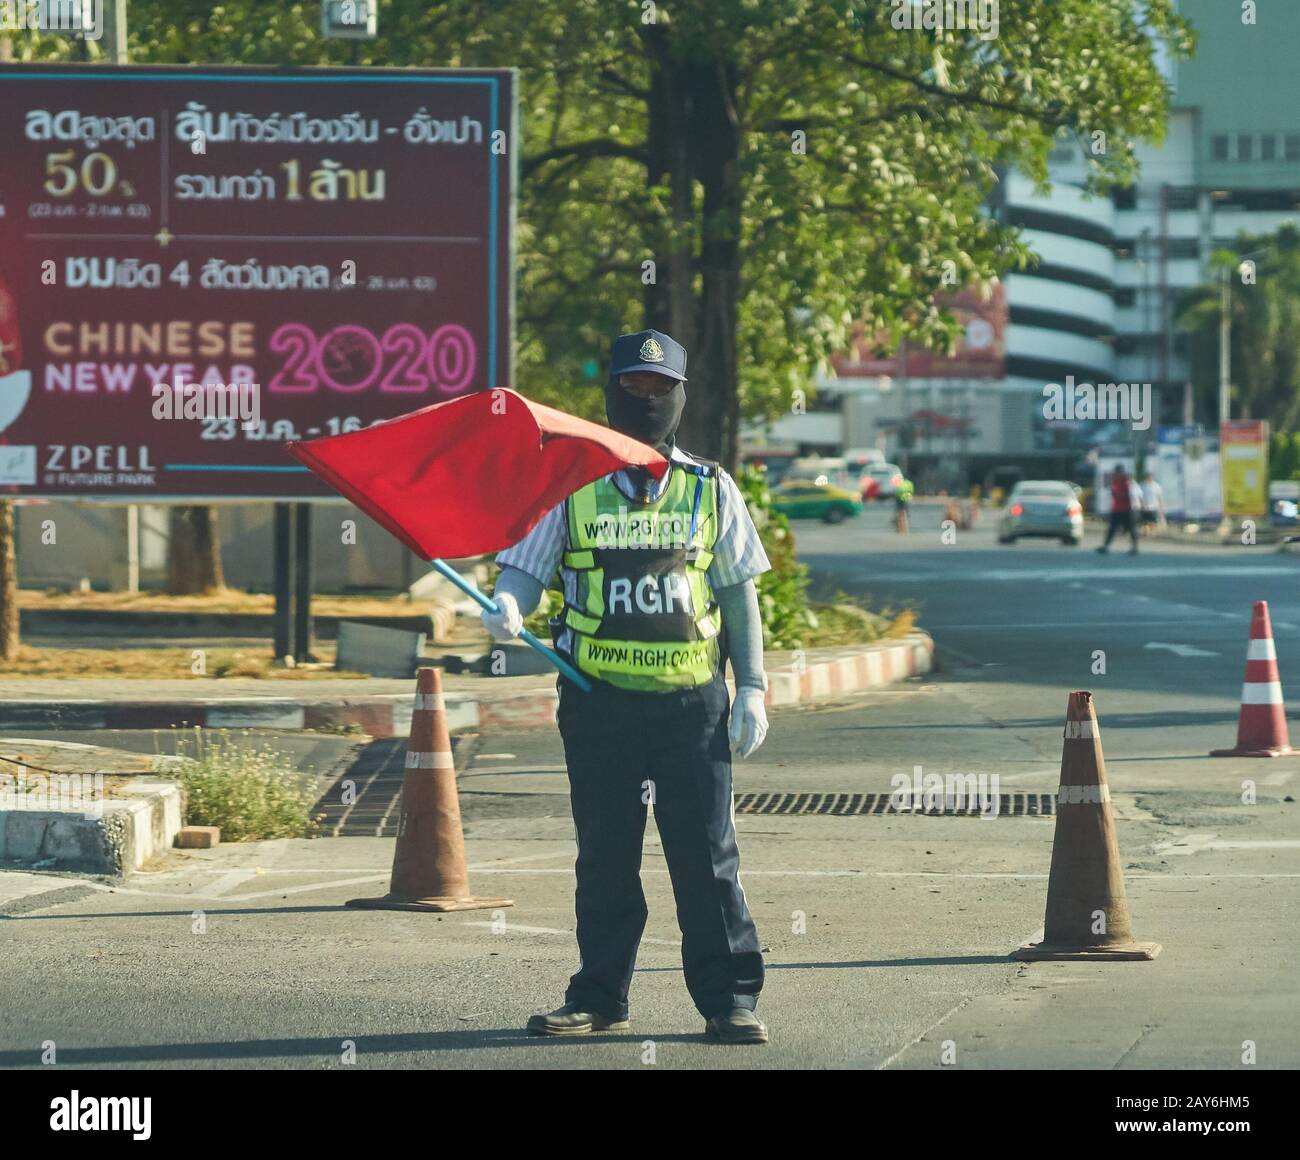 A security guard with a red flag, wearing a face mask, in front of a Chinese New Year billboard. Stock Photo